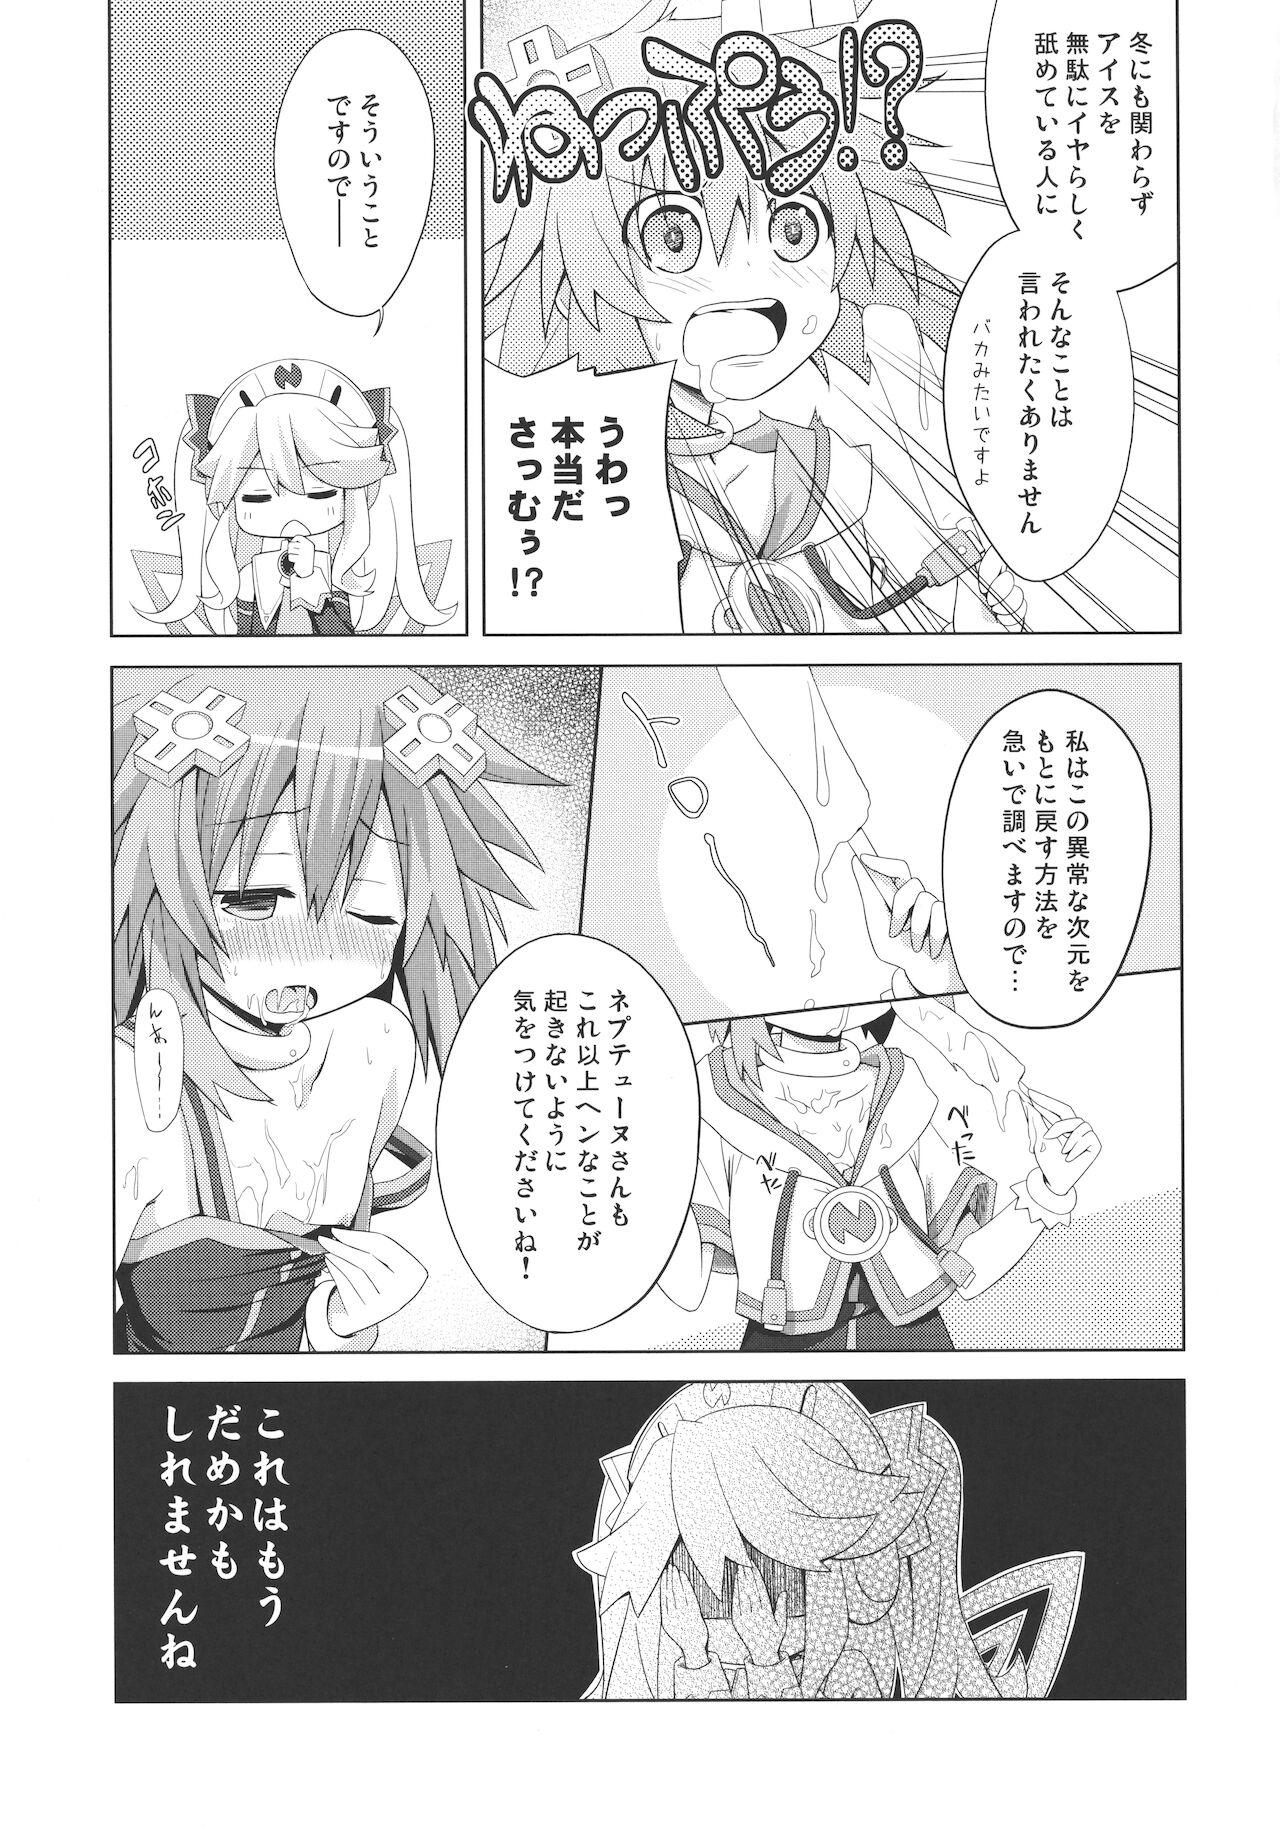 A certain Nepgear was harmed in the making of this doujinshi 6